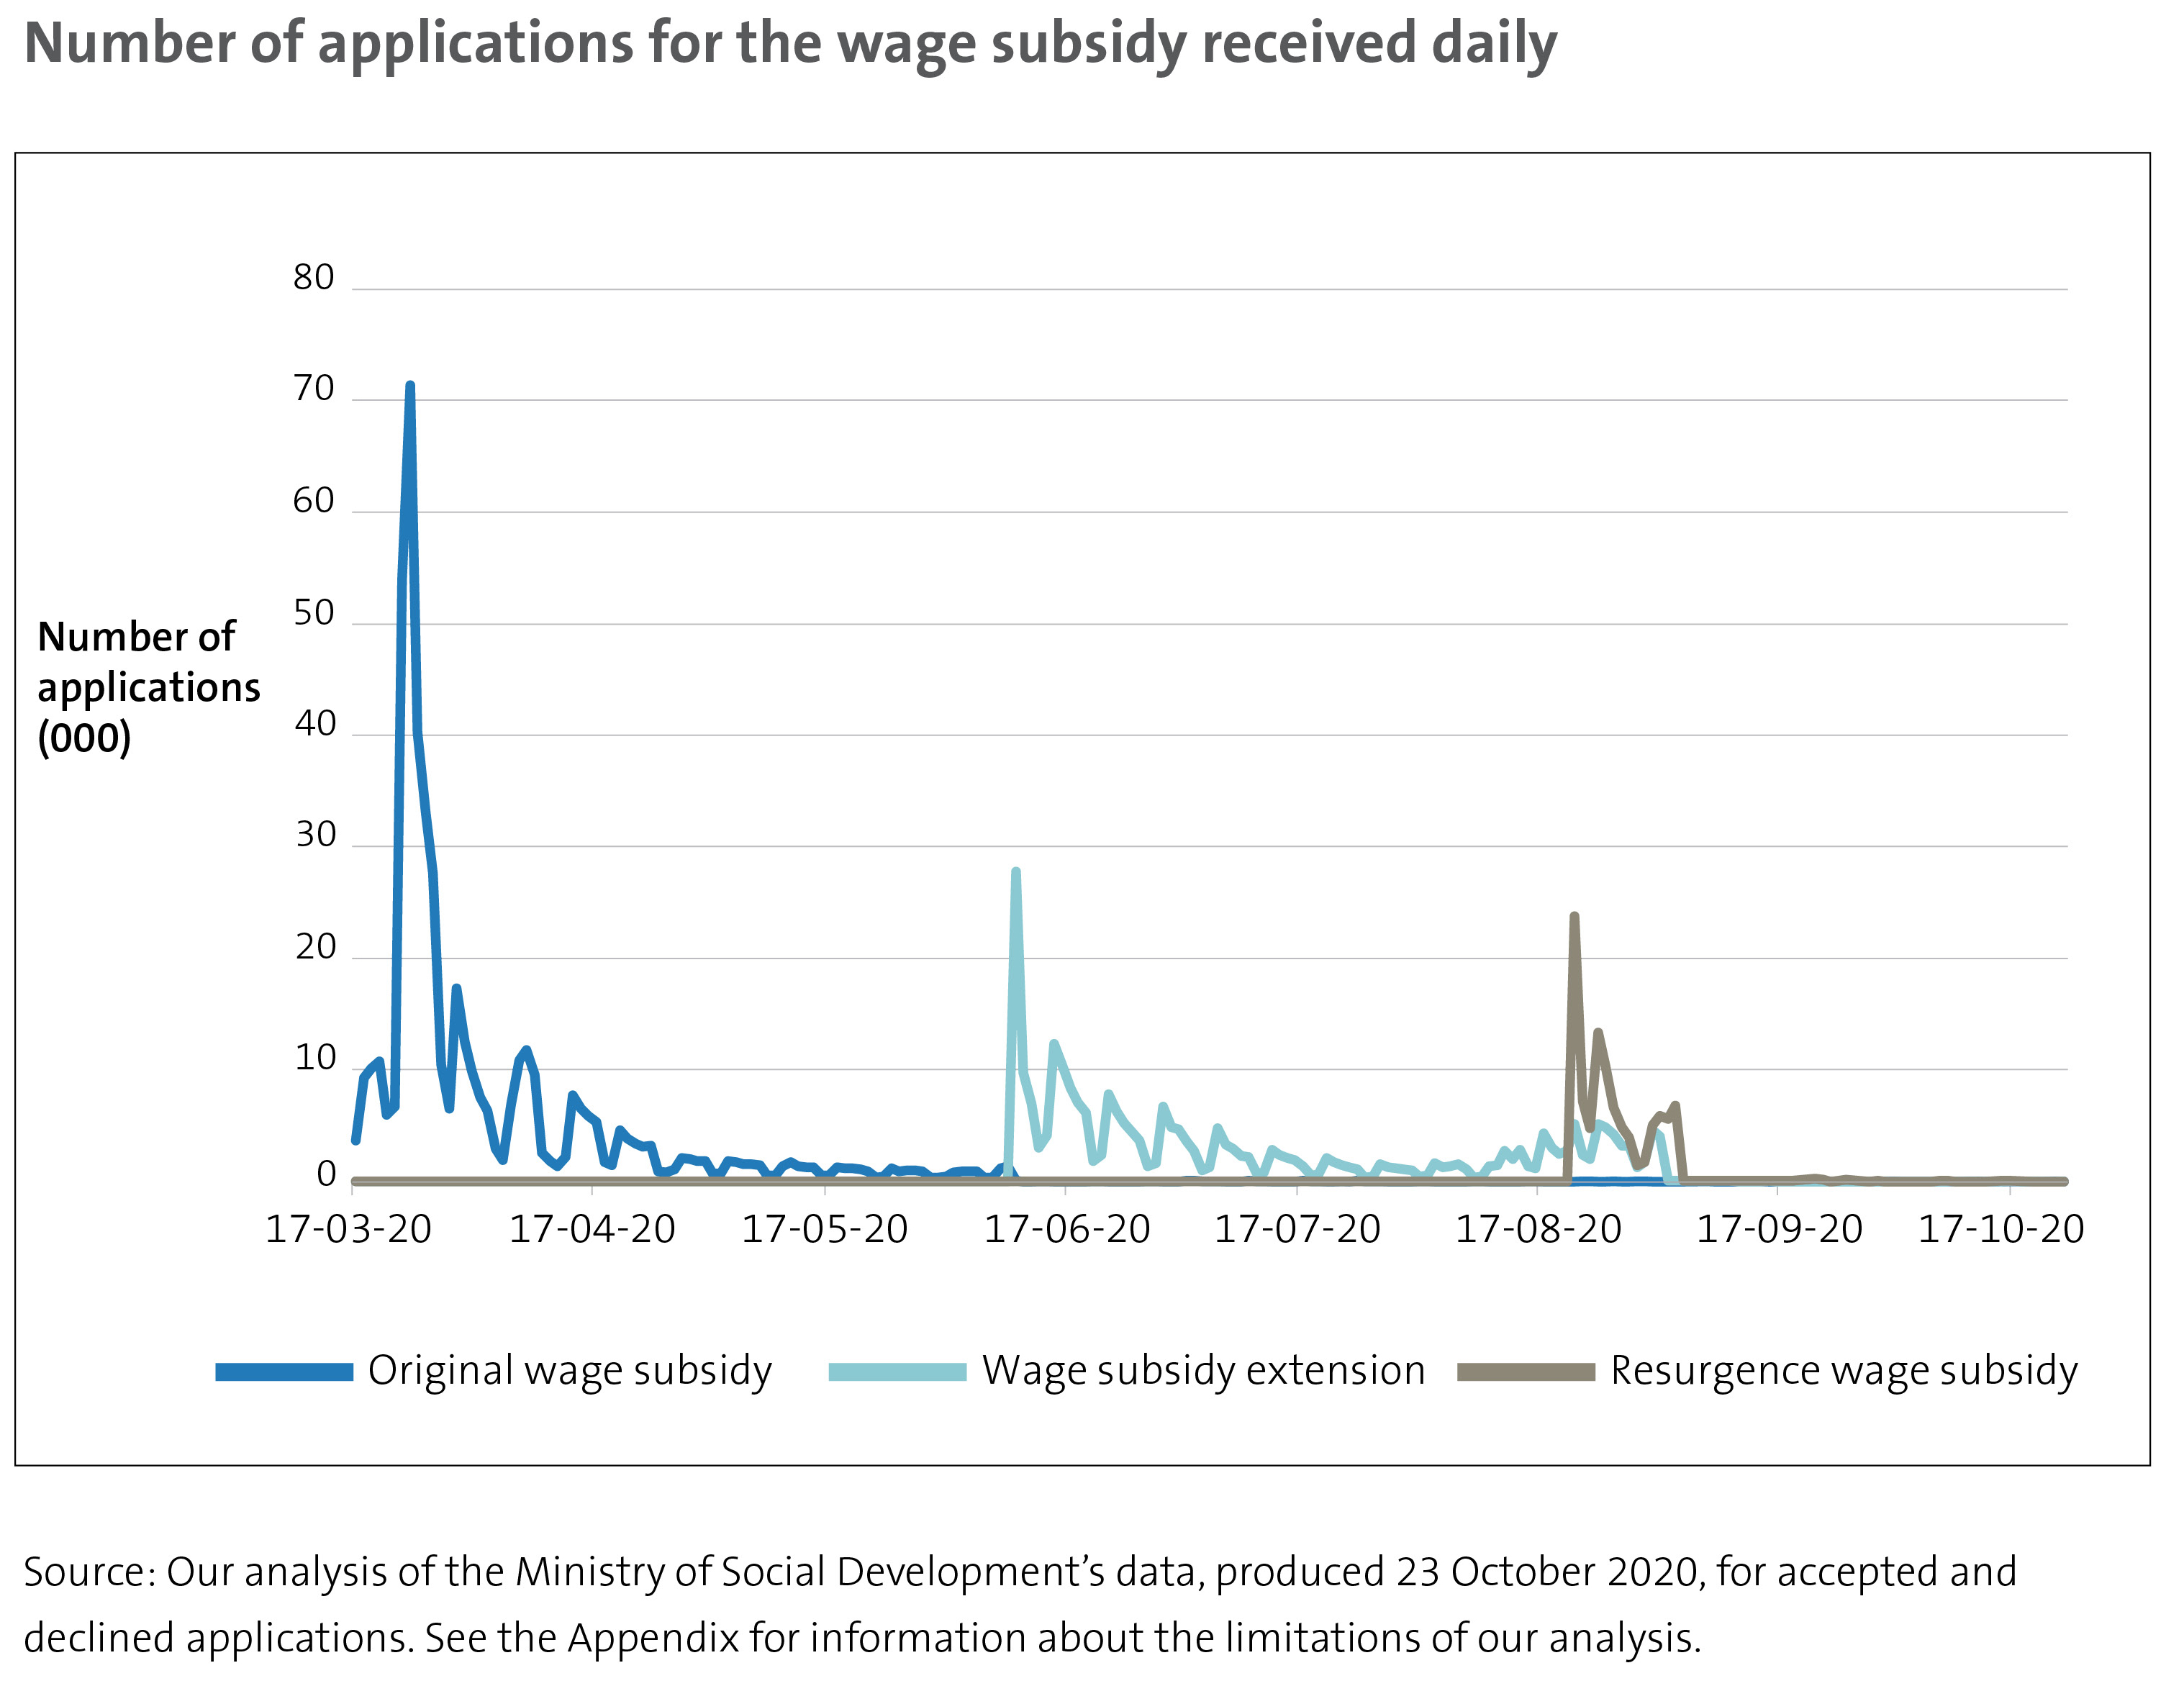 Figure 3 - Number of applications for the wage subsidy received daily